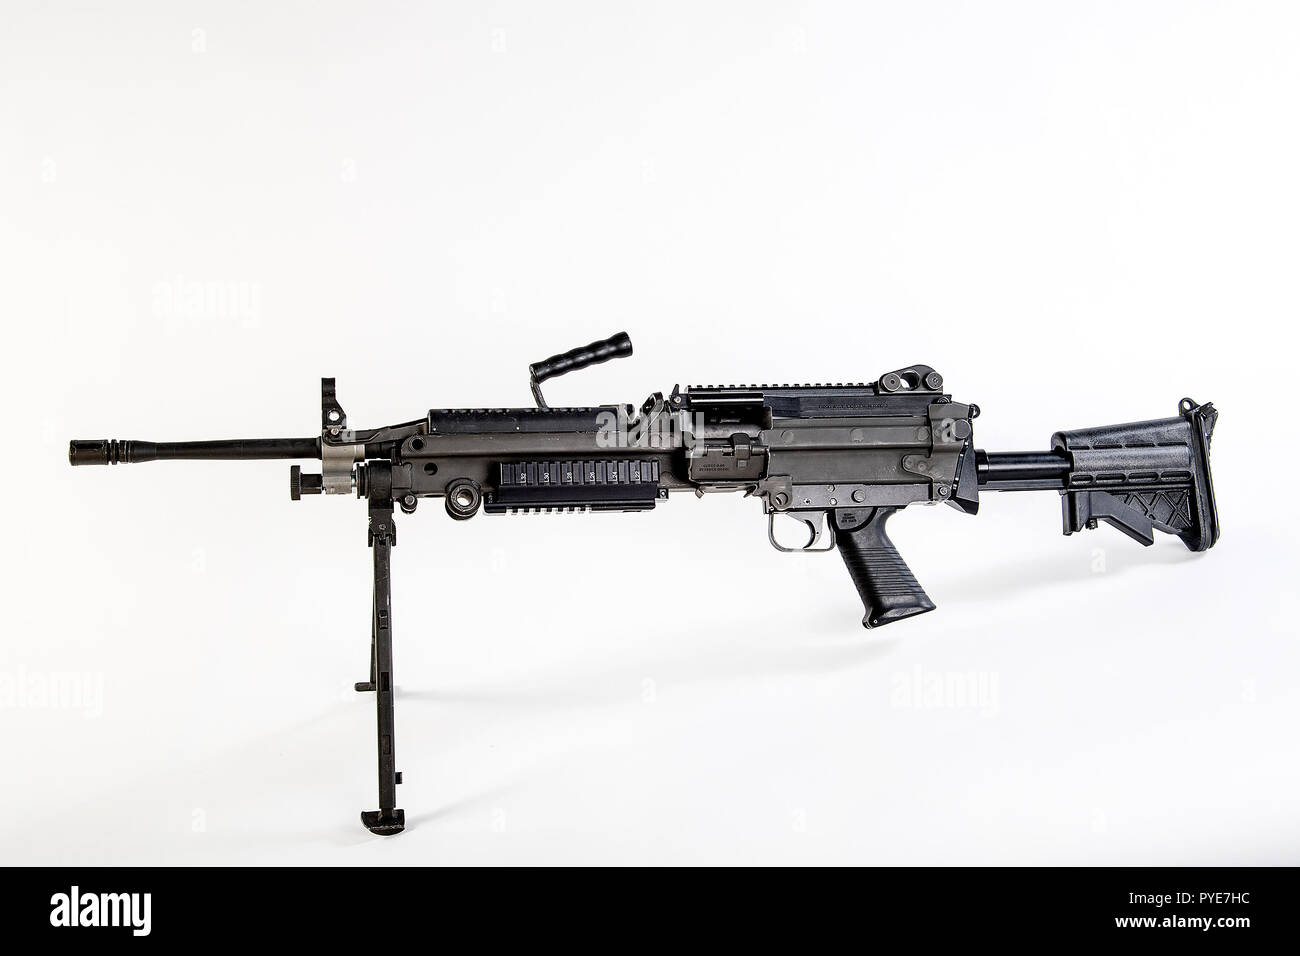 The M249 light machine gun, formerly designated the M249 Squad Automatic Weapon (SAW) and formally written as Light Machine Gun, 5.56 mm, M249, is the American adaptation of the Belgian FN Minimi, a light machine gun manufactured by the Belgian company FN Herstal (FN). The weapon was introduced in 1984 after being judged the most effective of a number of candidate weapons to address the lack of automatic firepower in small units. The M249 provides infantry squads with the high rate of fire of a machine gun combined with accuracy and portability approaching that of a rifle.    The M249 is gas o Stock Photo